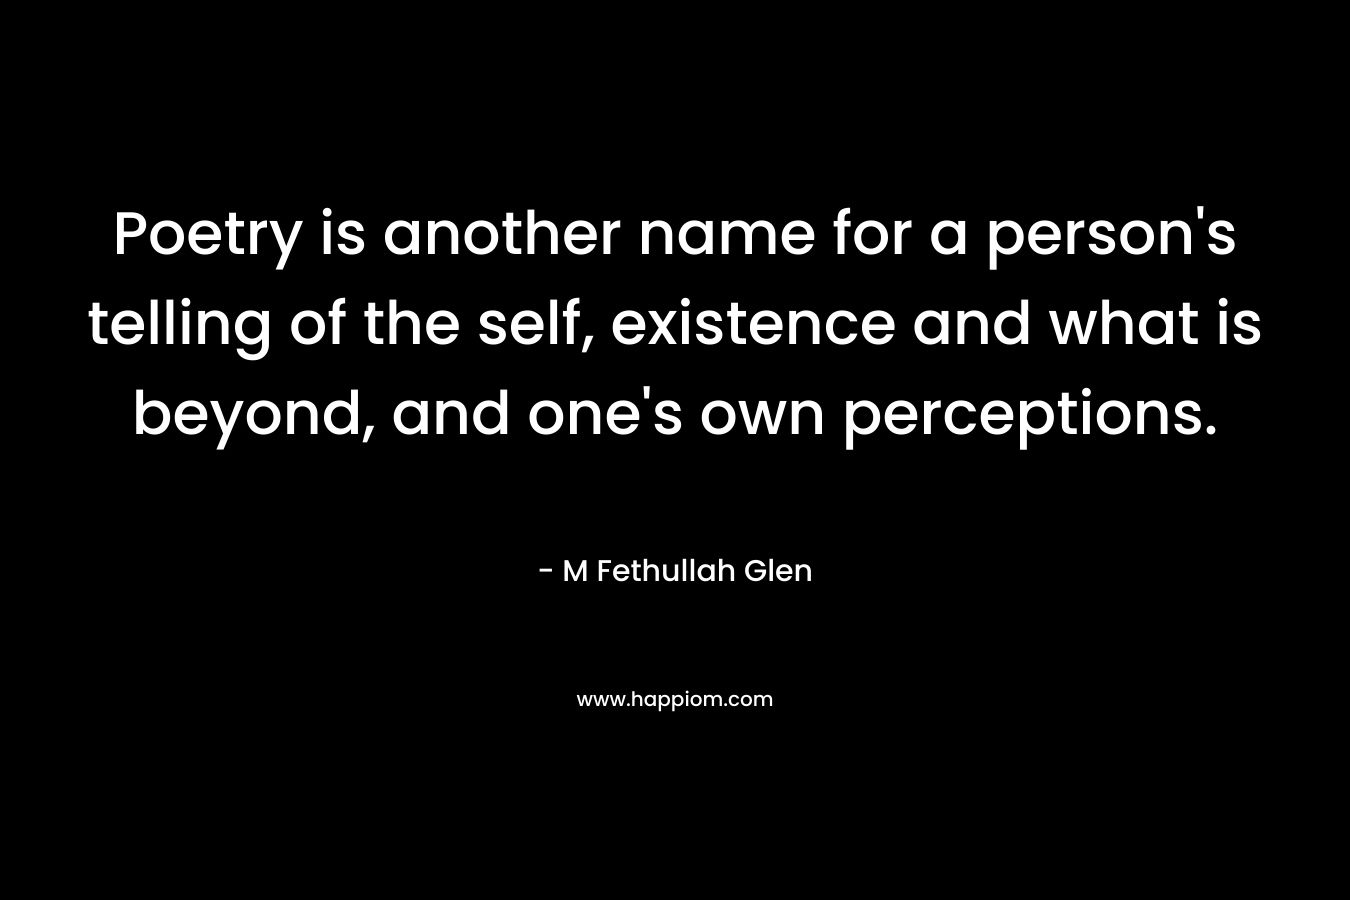 Poetry is another name for a person’s telling of the self, existence and what is beyond, and one’s own perceptions. – M Fethullah Glen